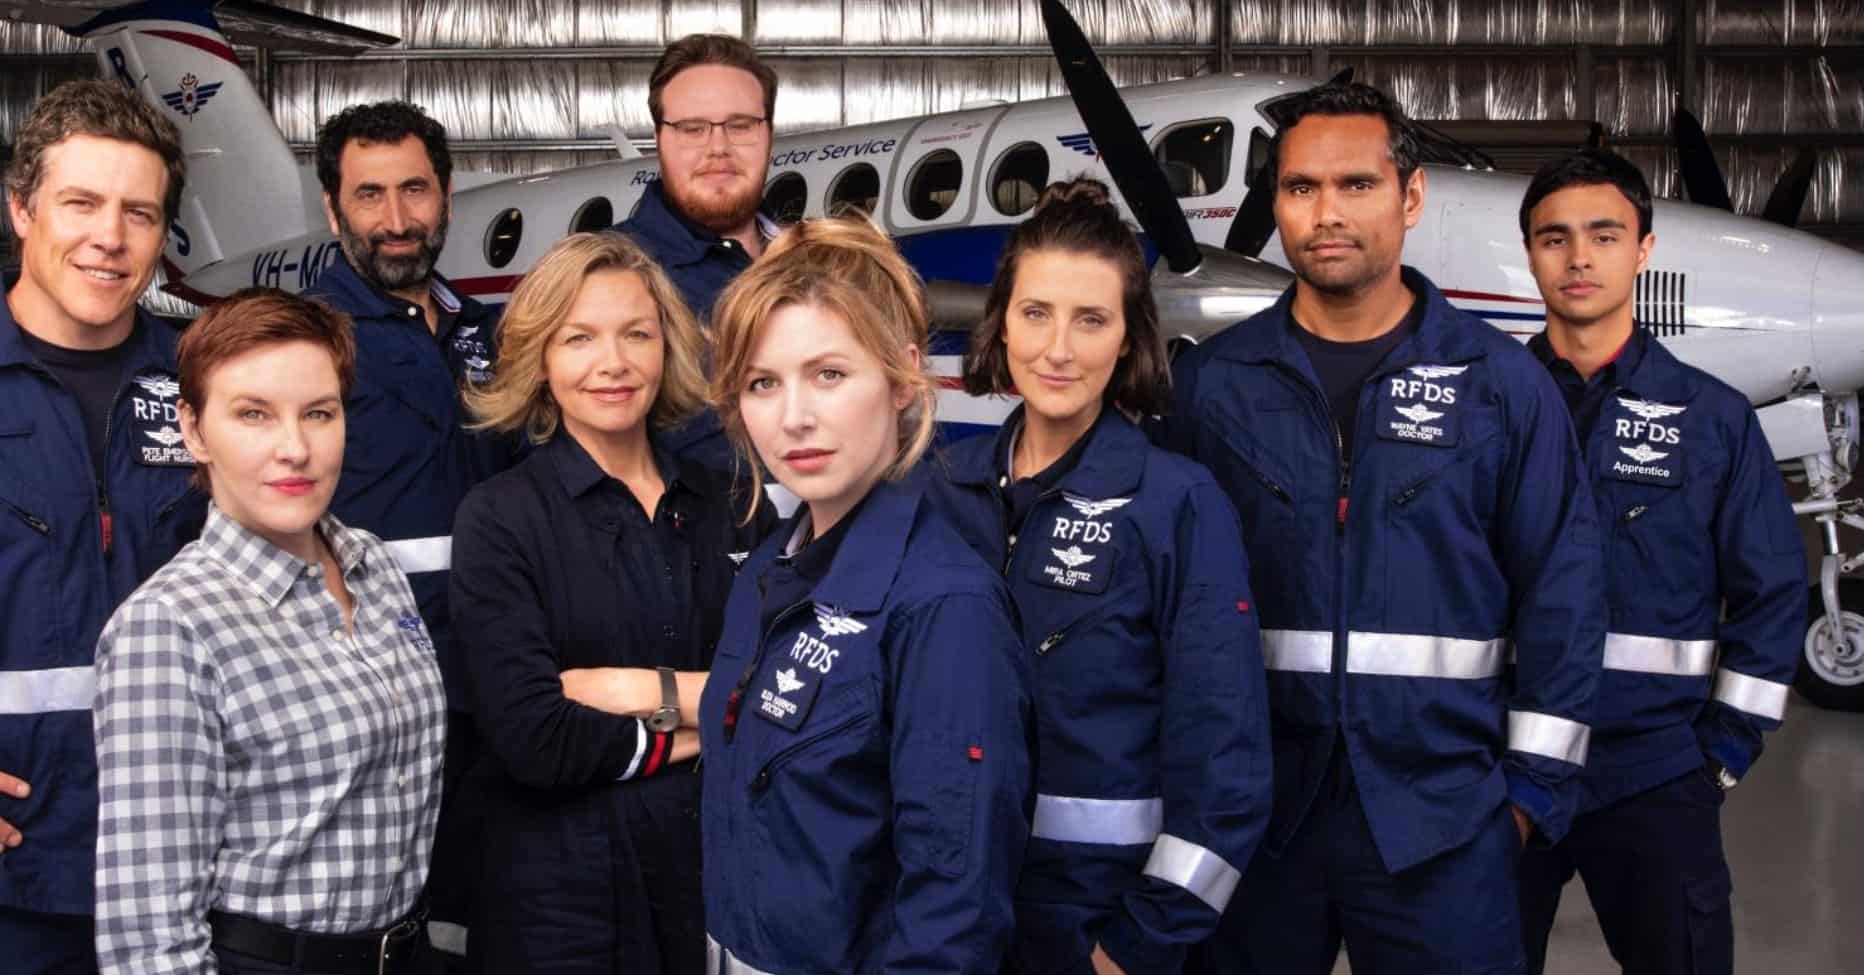 RFDS Season 2 Episode 1 Release Date, Preview & Streaming Guide